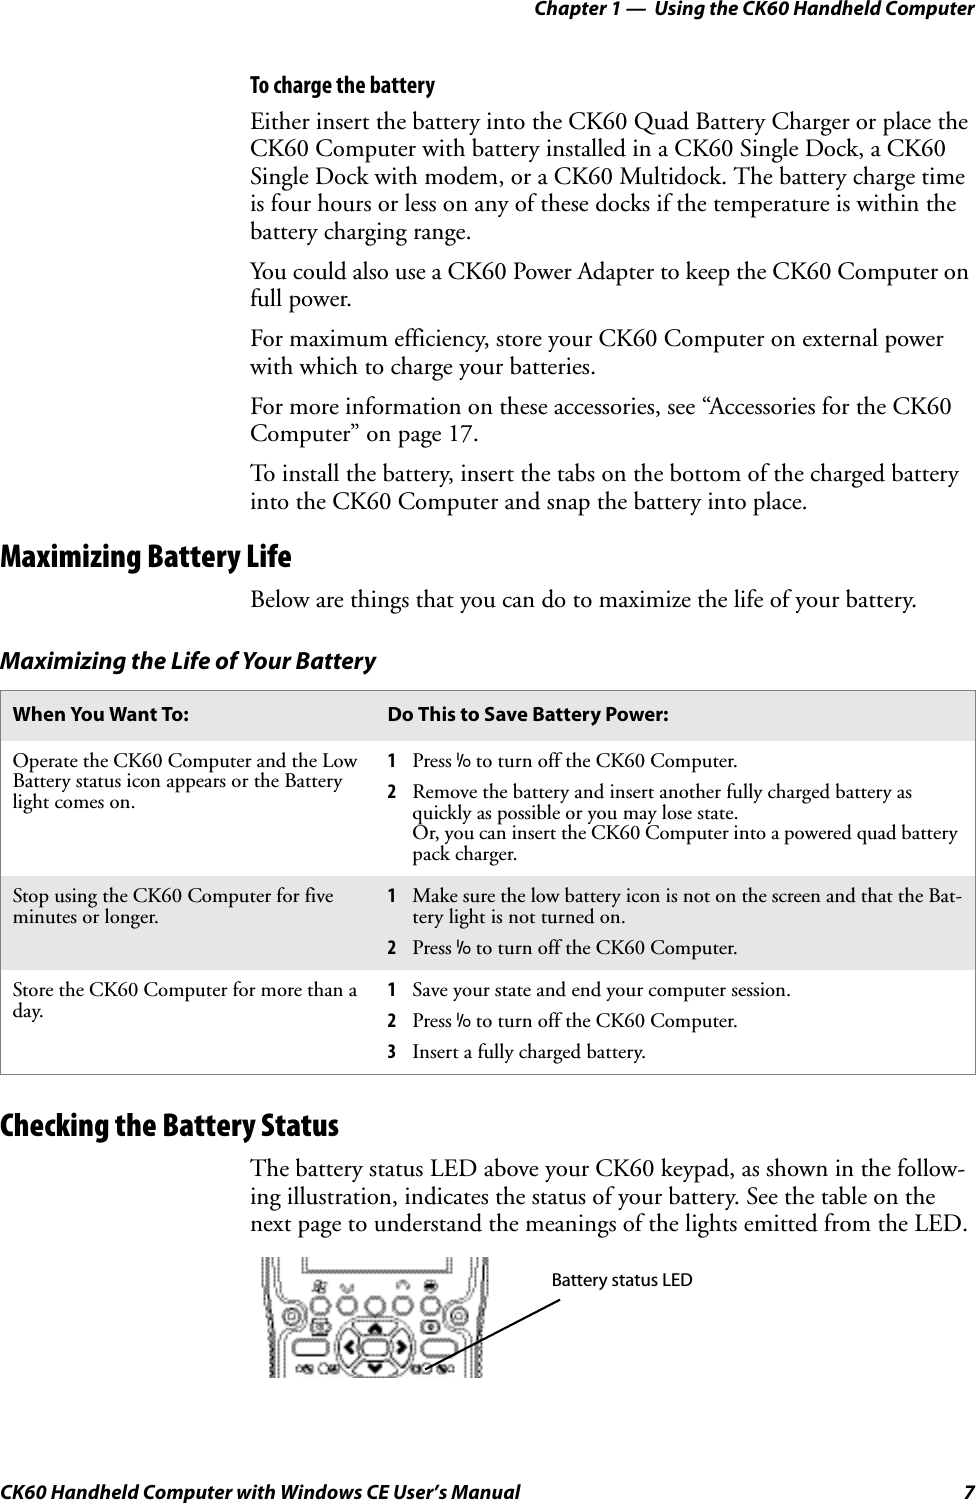 Chapter 1 —  Using the CK60 Handheld ComputerCK60 Handheld Computer with Windows CE User’s Manual 7To charge the batteryEither insert the battery into the CK60 Quad Battery Charger or place the CK60 Computer with battery installed in a CK60 Single Dock, a CK60 Single Dock with modem, or a CK60 Multidock. The battery charge time is four hours or less on any of these docks if the temperature is within the battery charging range.You could also use a CK60 Power Adapter to keep the CK60 Computer on full power.For maximum efficiency, store your CK60 Computer on external power with which to charge your batteries.For more information on these accessories, see “Accessories for the CK60 Computer” on page 17.To install the battery, insert the tabs on the bottom of the charged battery into the CK60 Computer and snap the battery into place.Maximizing Battery LifeBelow are things that you can do to maximize the life of your battery.Checking the Battery StatusThe battery status LED above your CK60 keypad, as shown in the follow-ing illustration, indicates the status of your battery. See the table on the next page to understand the meanings of the lights emitted from the LED.Maximizing the Life of Your BatteryWhen You Want To: Do This to Save Battery Power:Operate the CK60 Computer and the Low Battery status icon appears or the Battery light comes on.1Press I to turn off the CK60 Computer.2Remove the battery and insert another fully charged battery as quickly as possible or you may lose state.Or, you can insert the CK60 Computer into a powered quad battery pack charger.Stop using the CK60 Computer for five minutes or longer.1Make sure the low battery icon is not on the screen and that the Bat-tery light is not turned on.2Press I to turn off the CK60 Computer.Store the CK60 Computer for more than a day.1Save your state and end your computer session.2Press I to turn off the CK60 Computer.3Insert a fully charged battery.Battery status LED